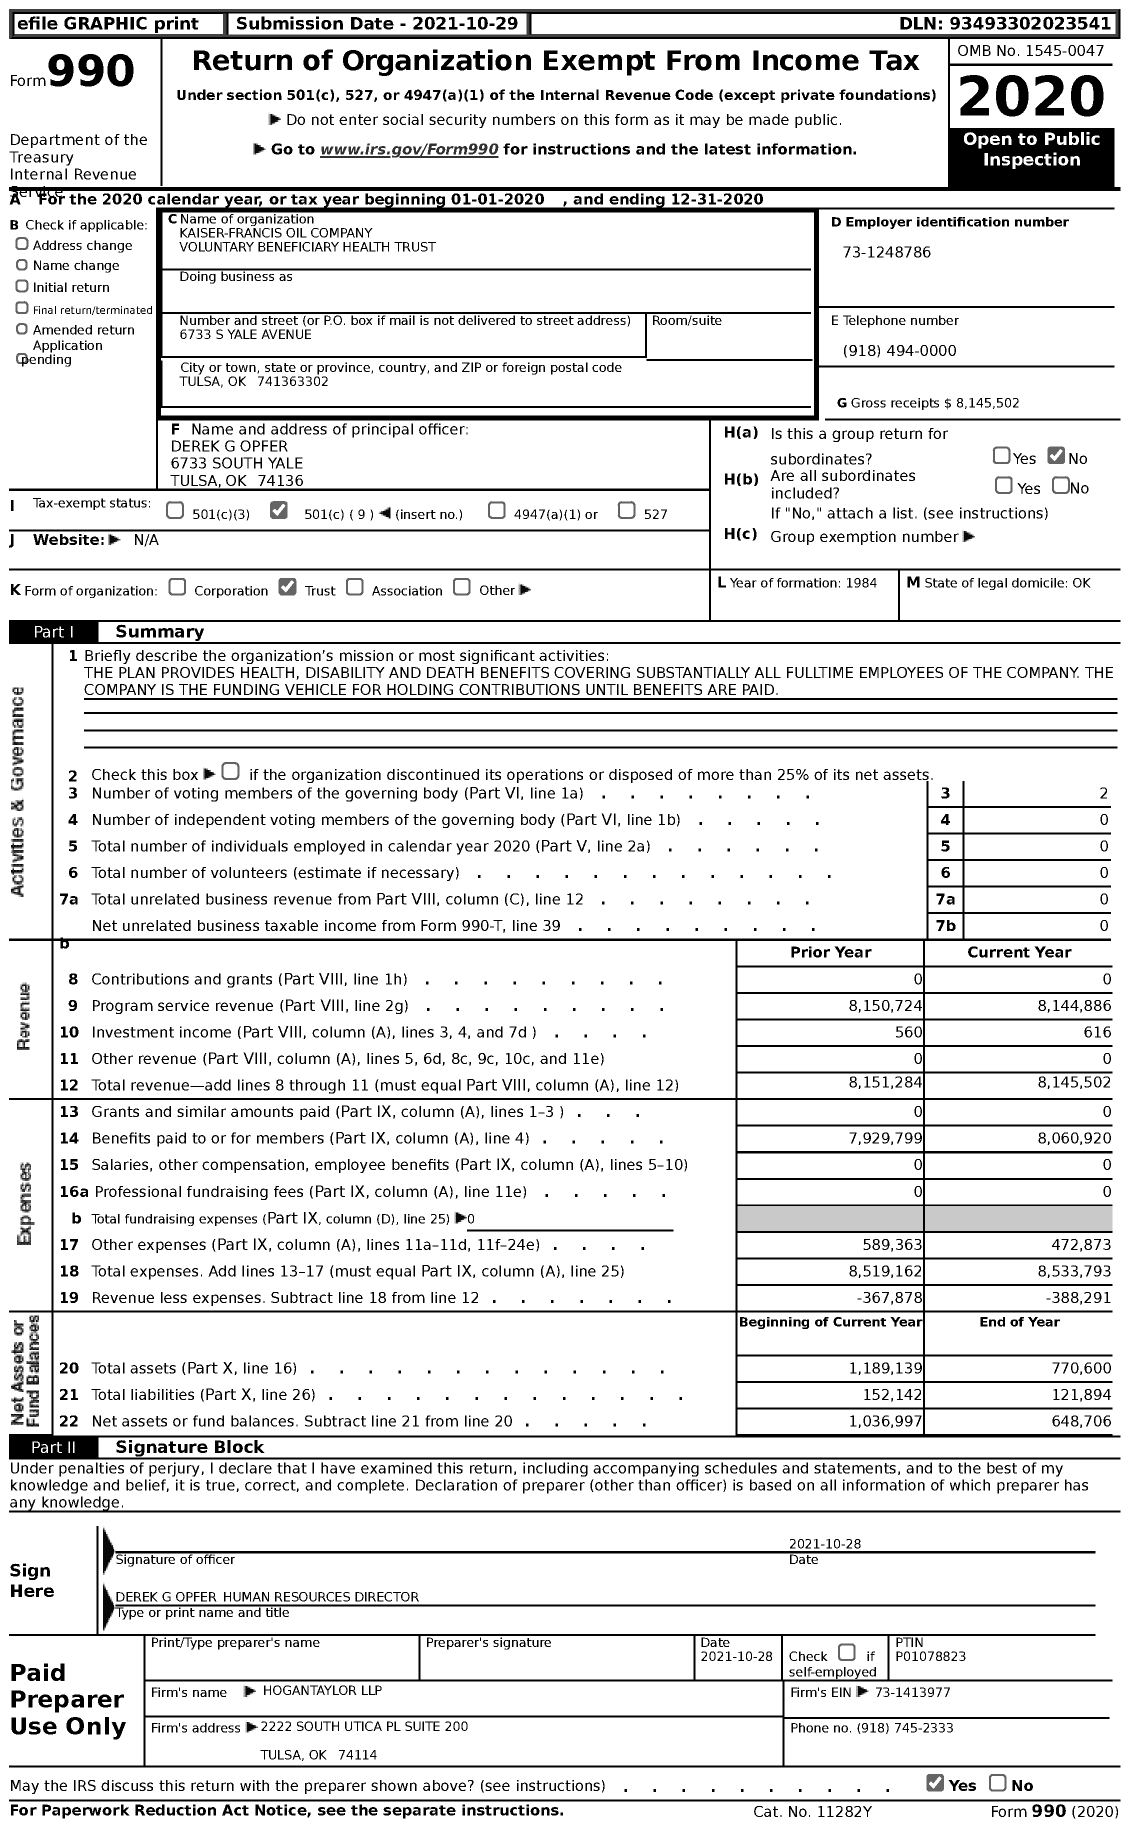 Image of first page of 2020 Form 990 for Kaiser-Francis Oil Company Voluntary Beneficiary Health Trust